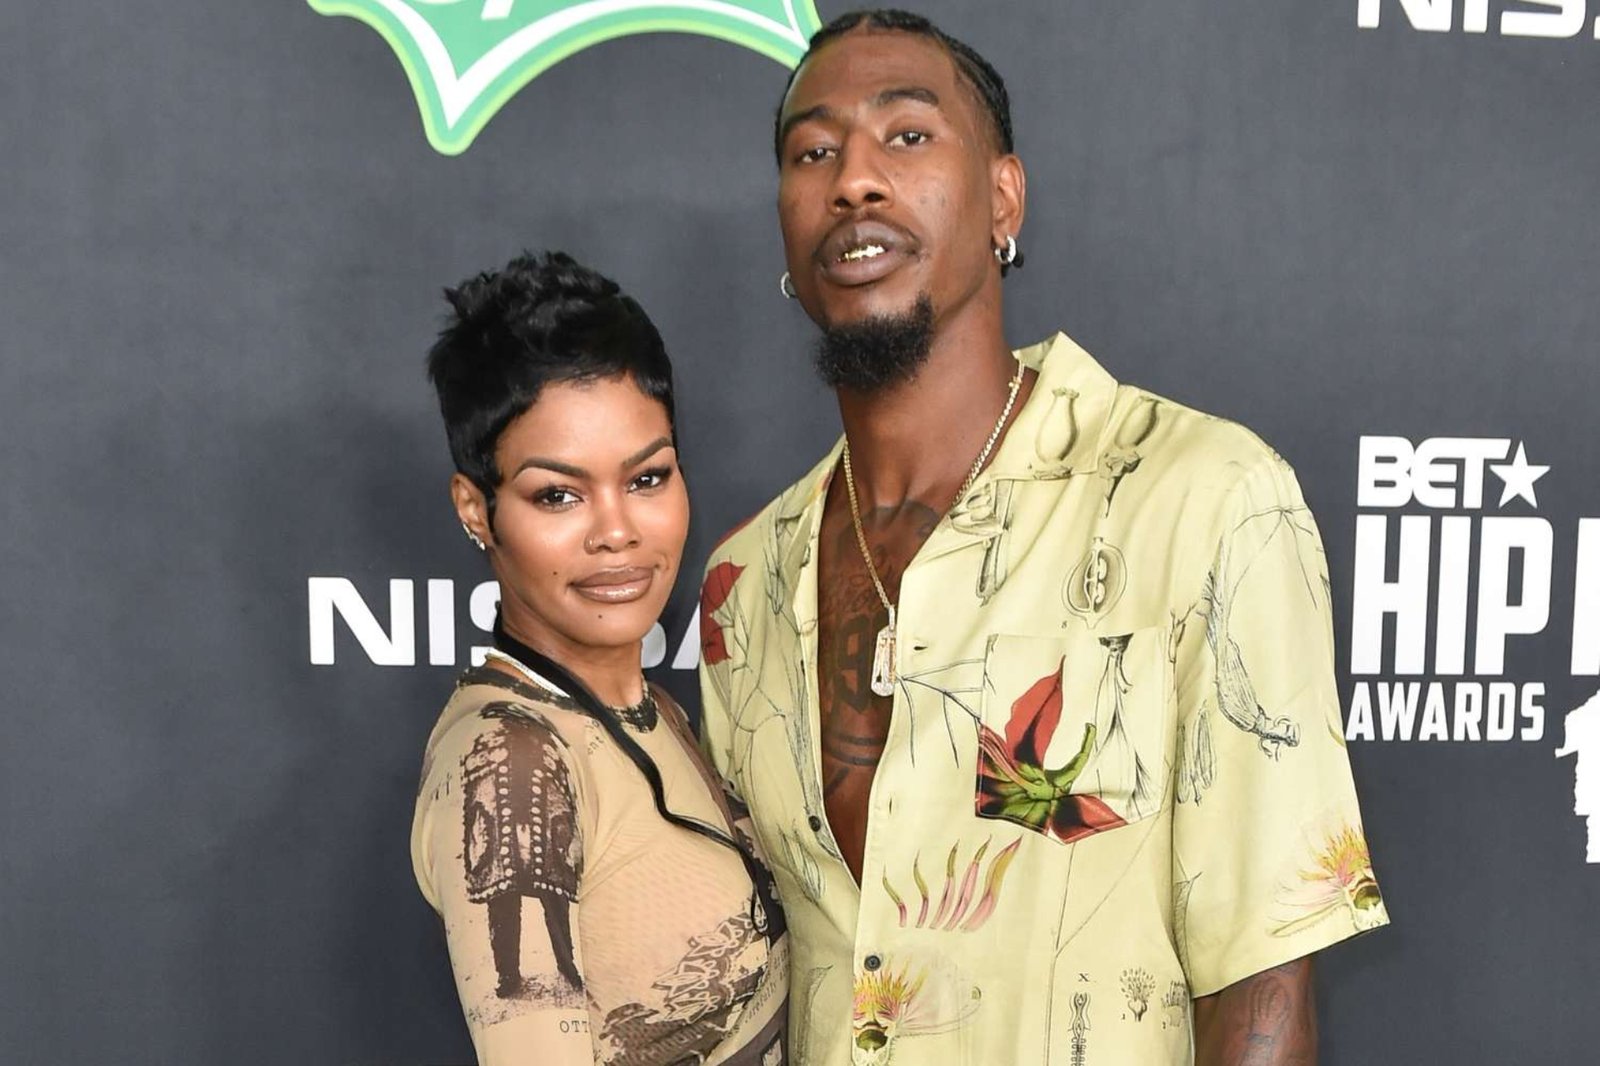 Teyana Taylor and Iman Shumpert's Divorce Battle Intensifies with Allegations of Irresponsibility